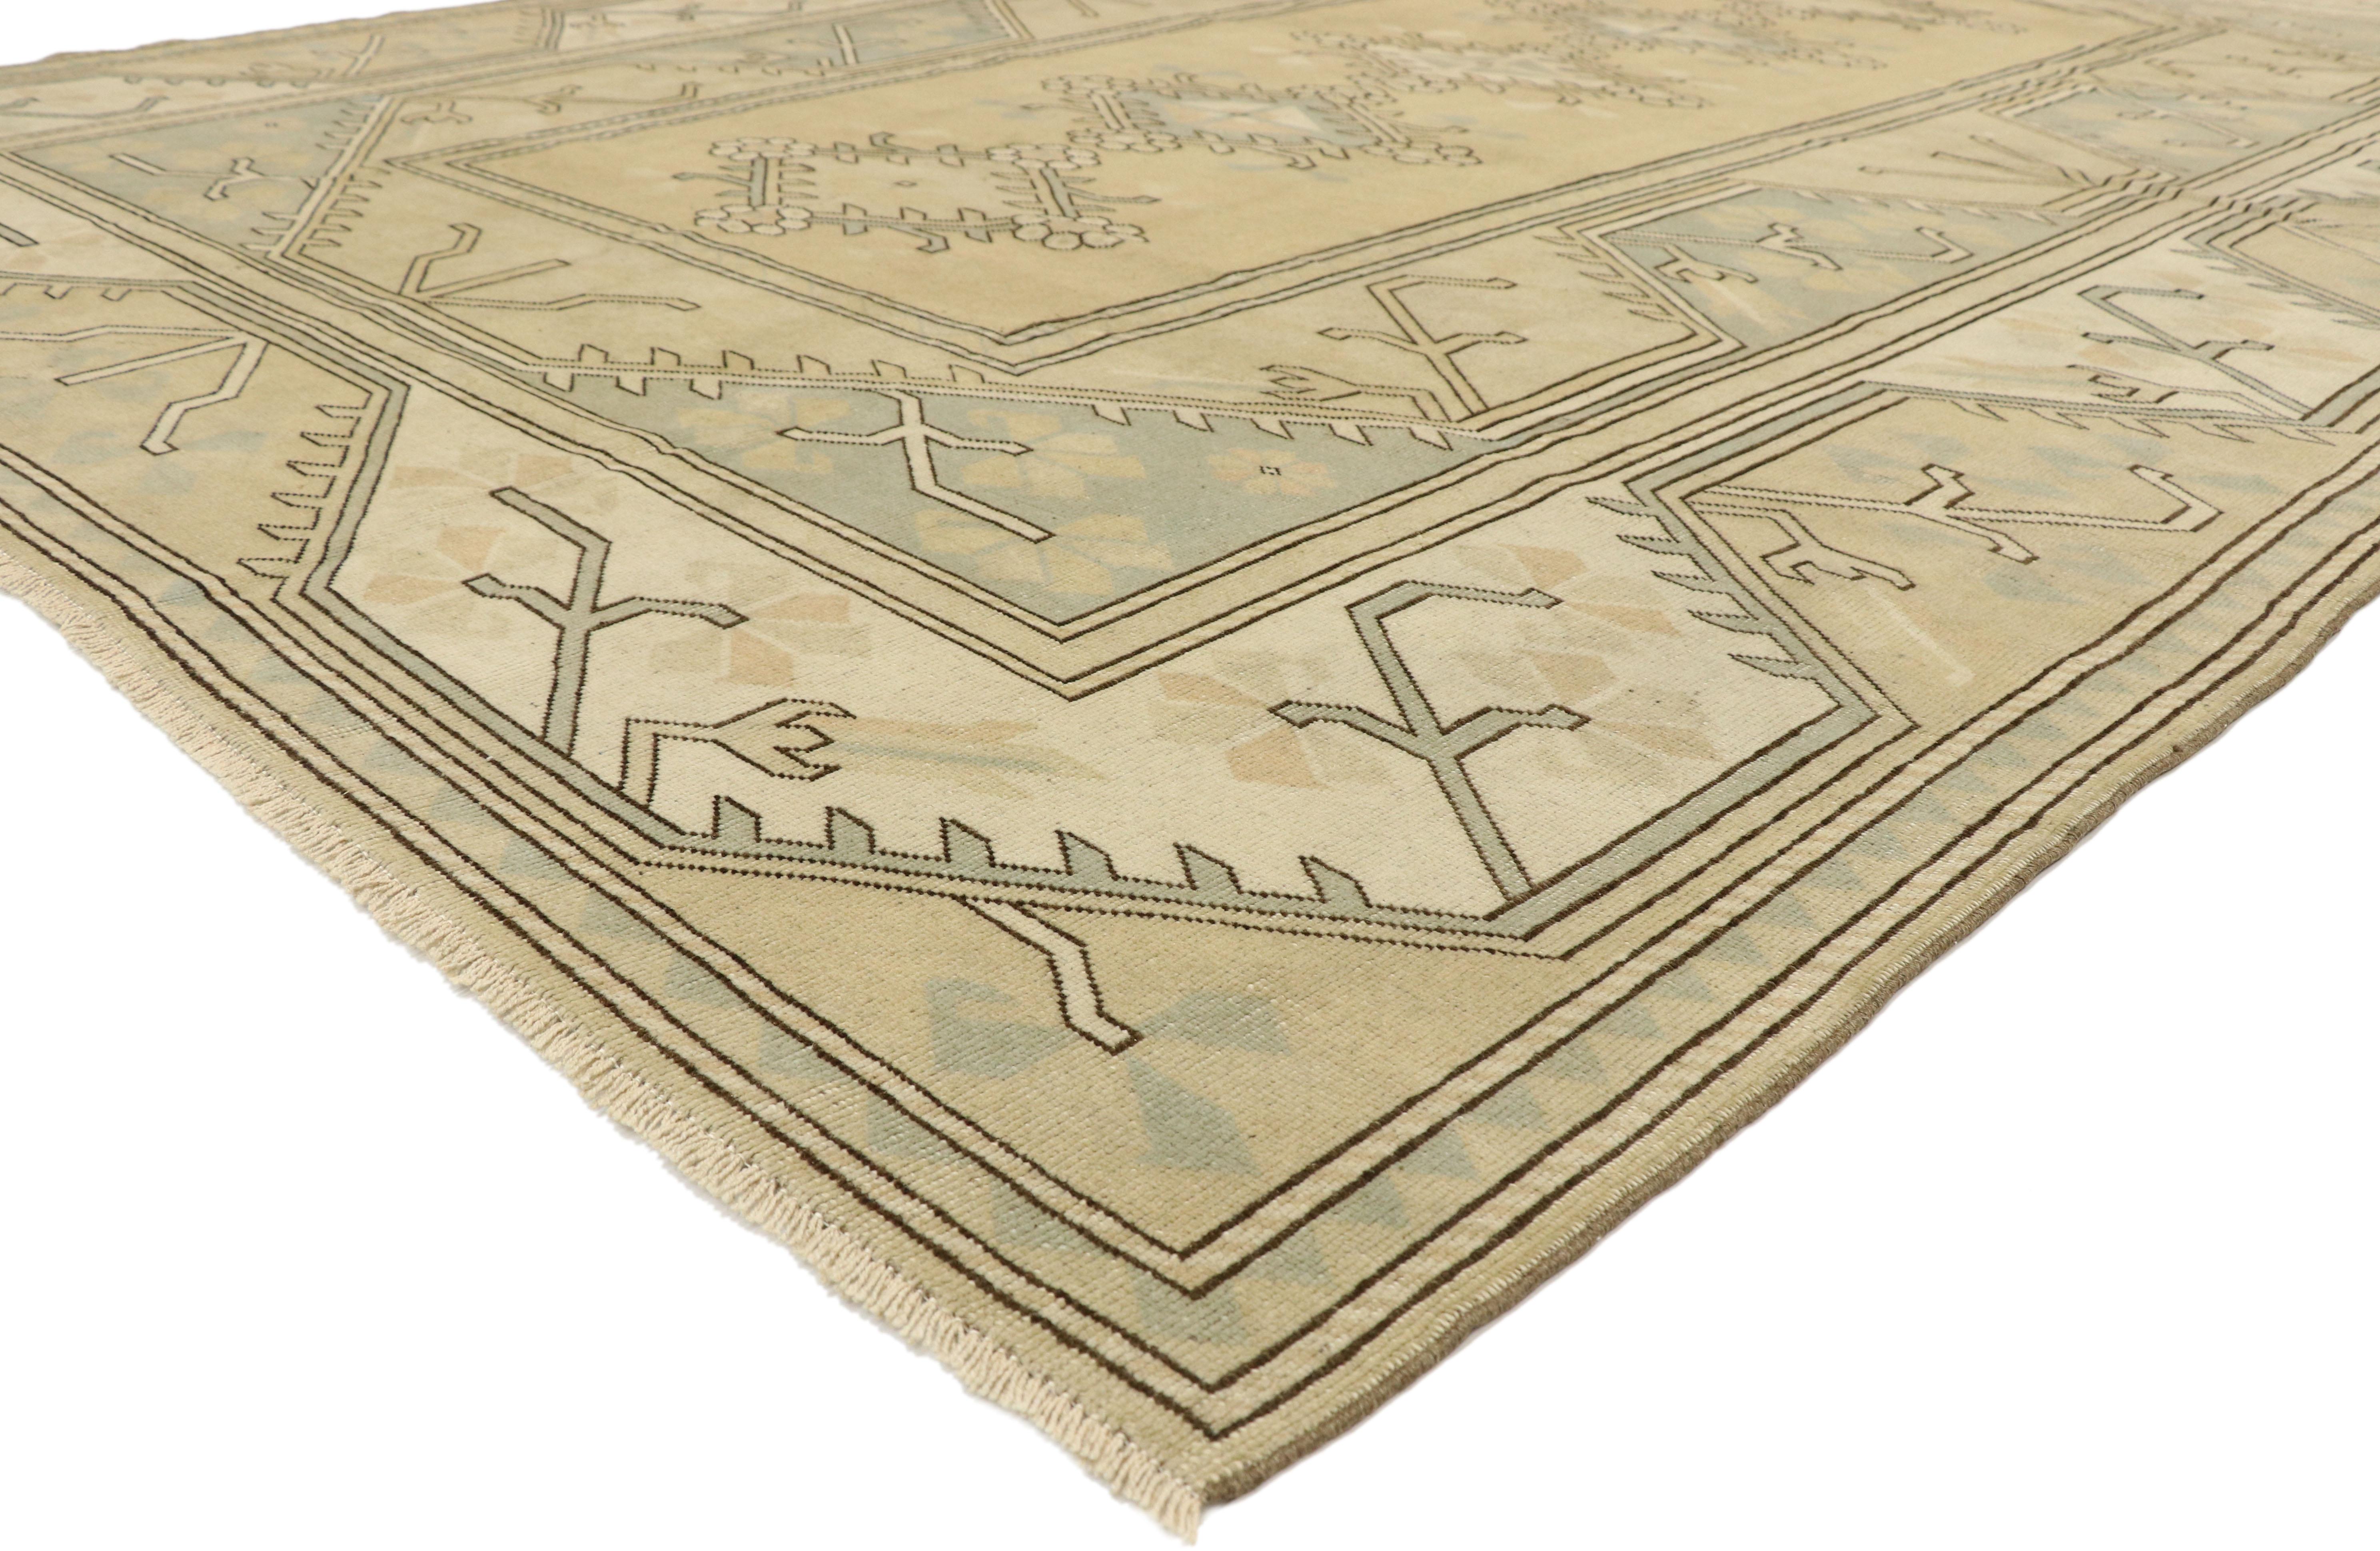 51849 Vintage Turkish Oushak Rug 08'10 x 11'08. Full of tiny details and an expressive design, this hand-knotted wool vintage Turkish Oushak rug is a captivating vision of woven beauty. The khaki colored field features five botanical lozenge